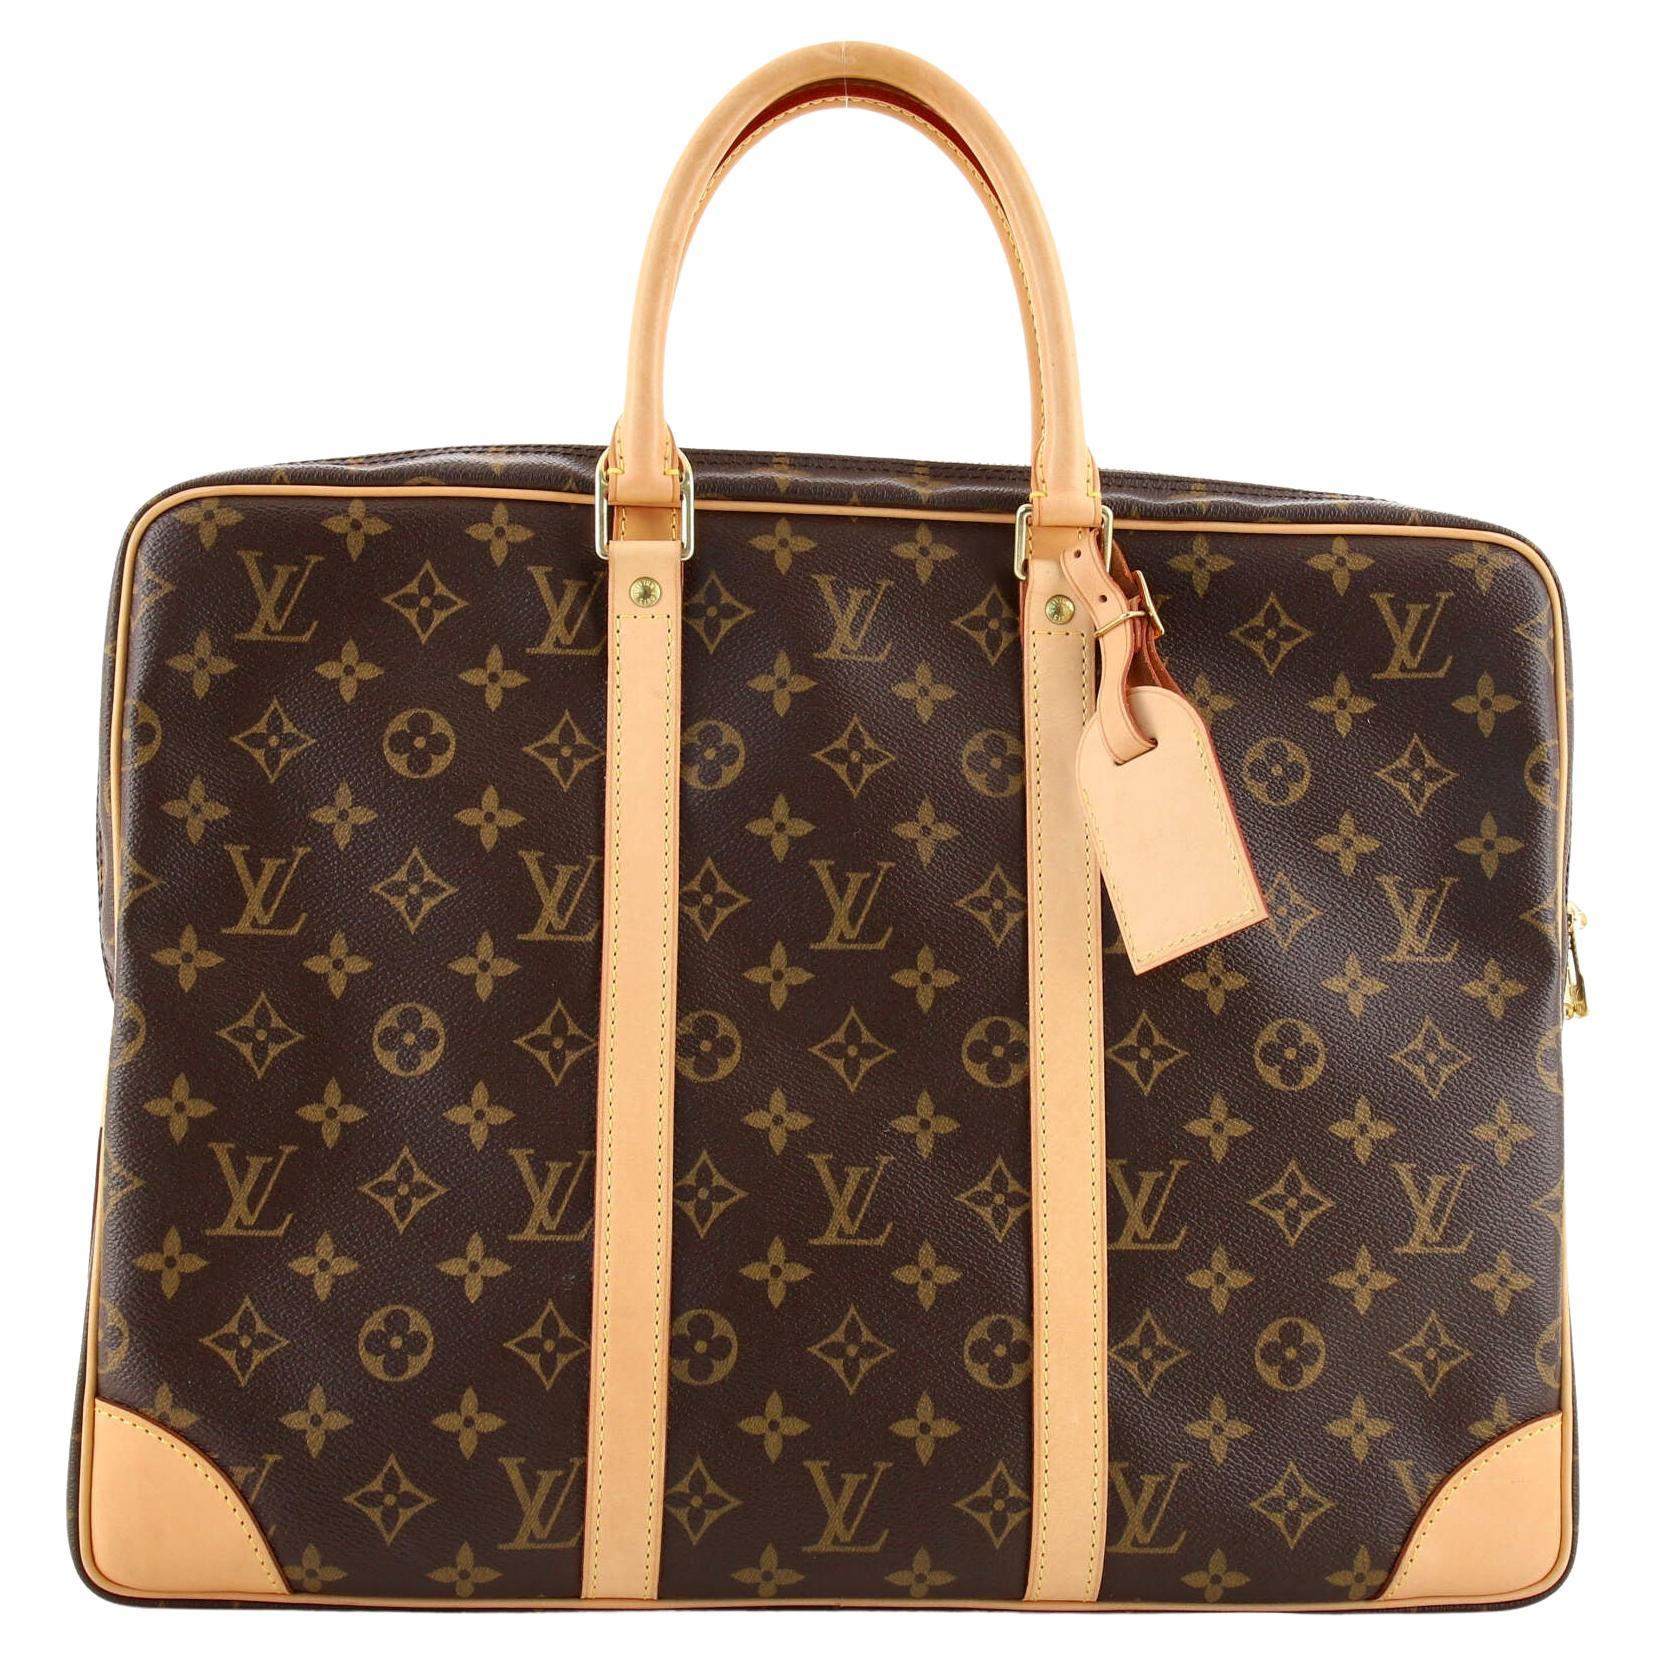 Well suited. Vintage Louis Vuitton Porte-Documents with a modern